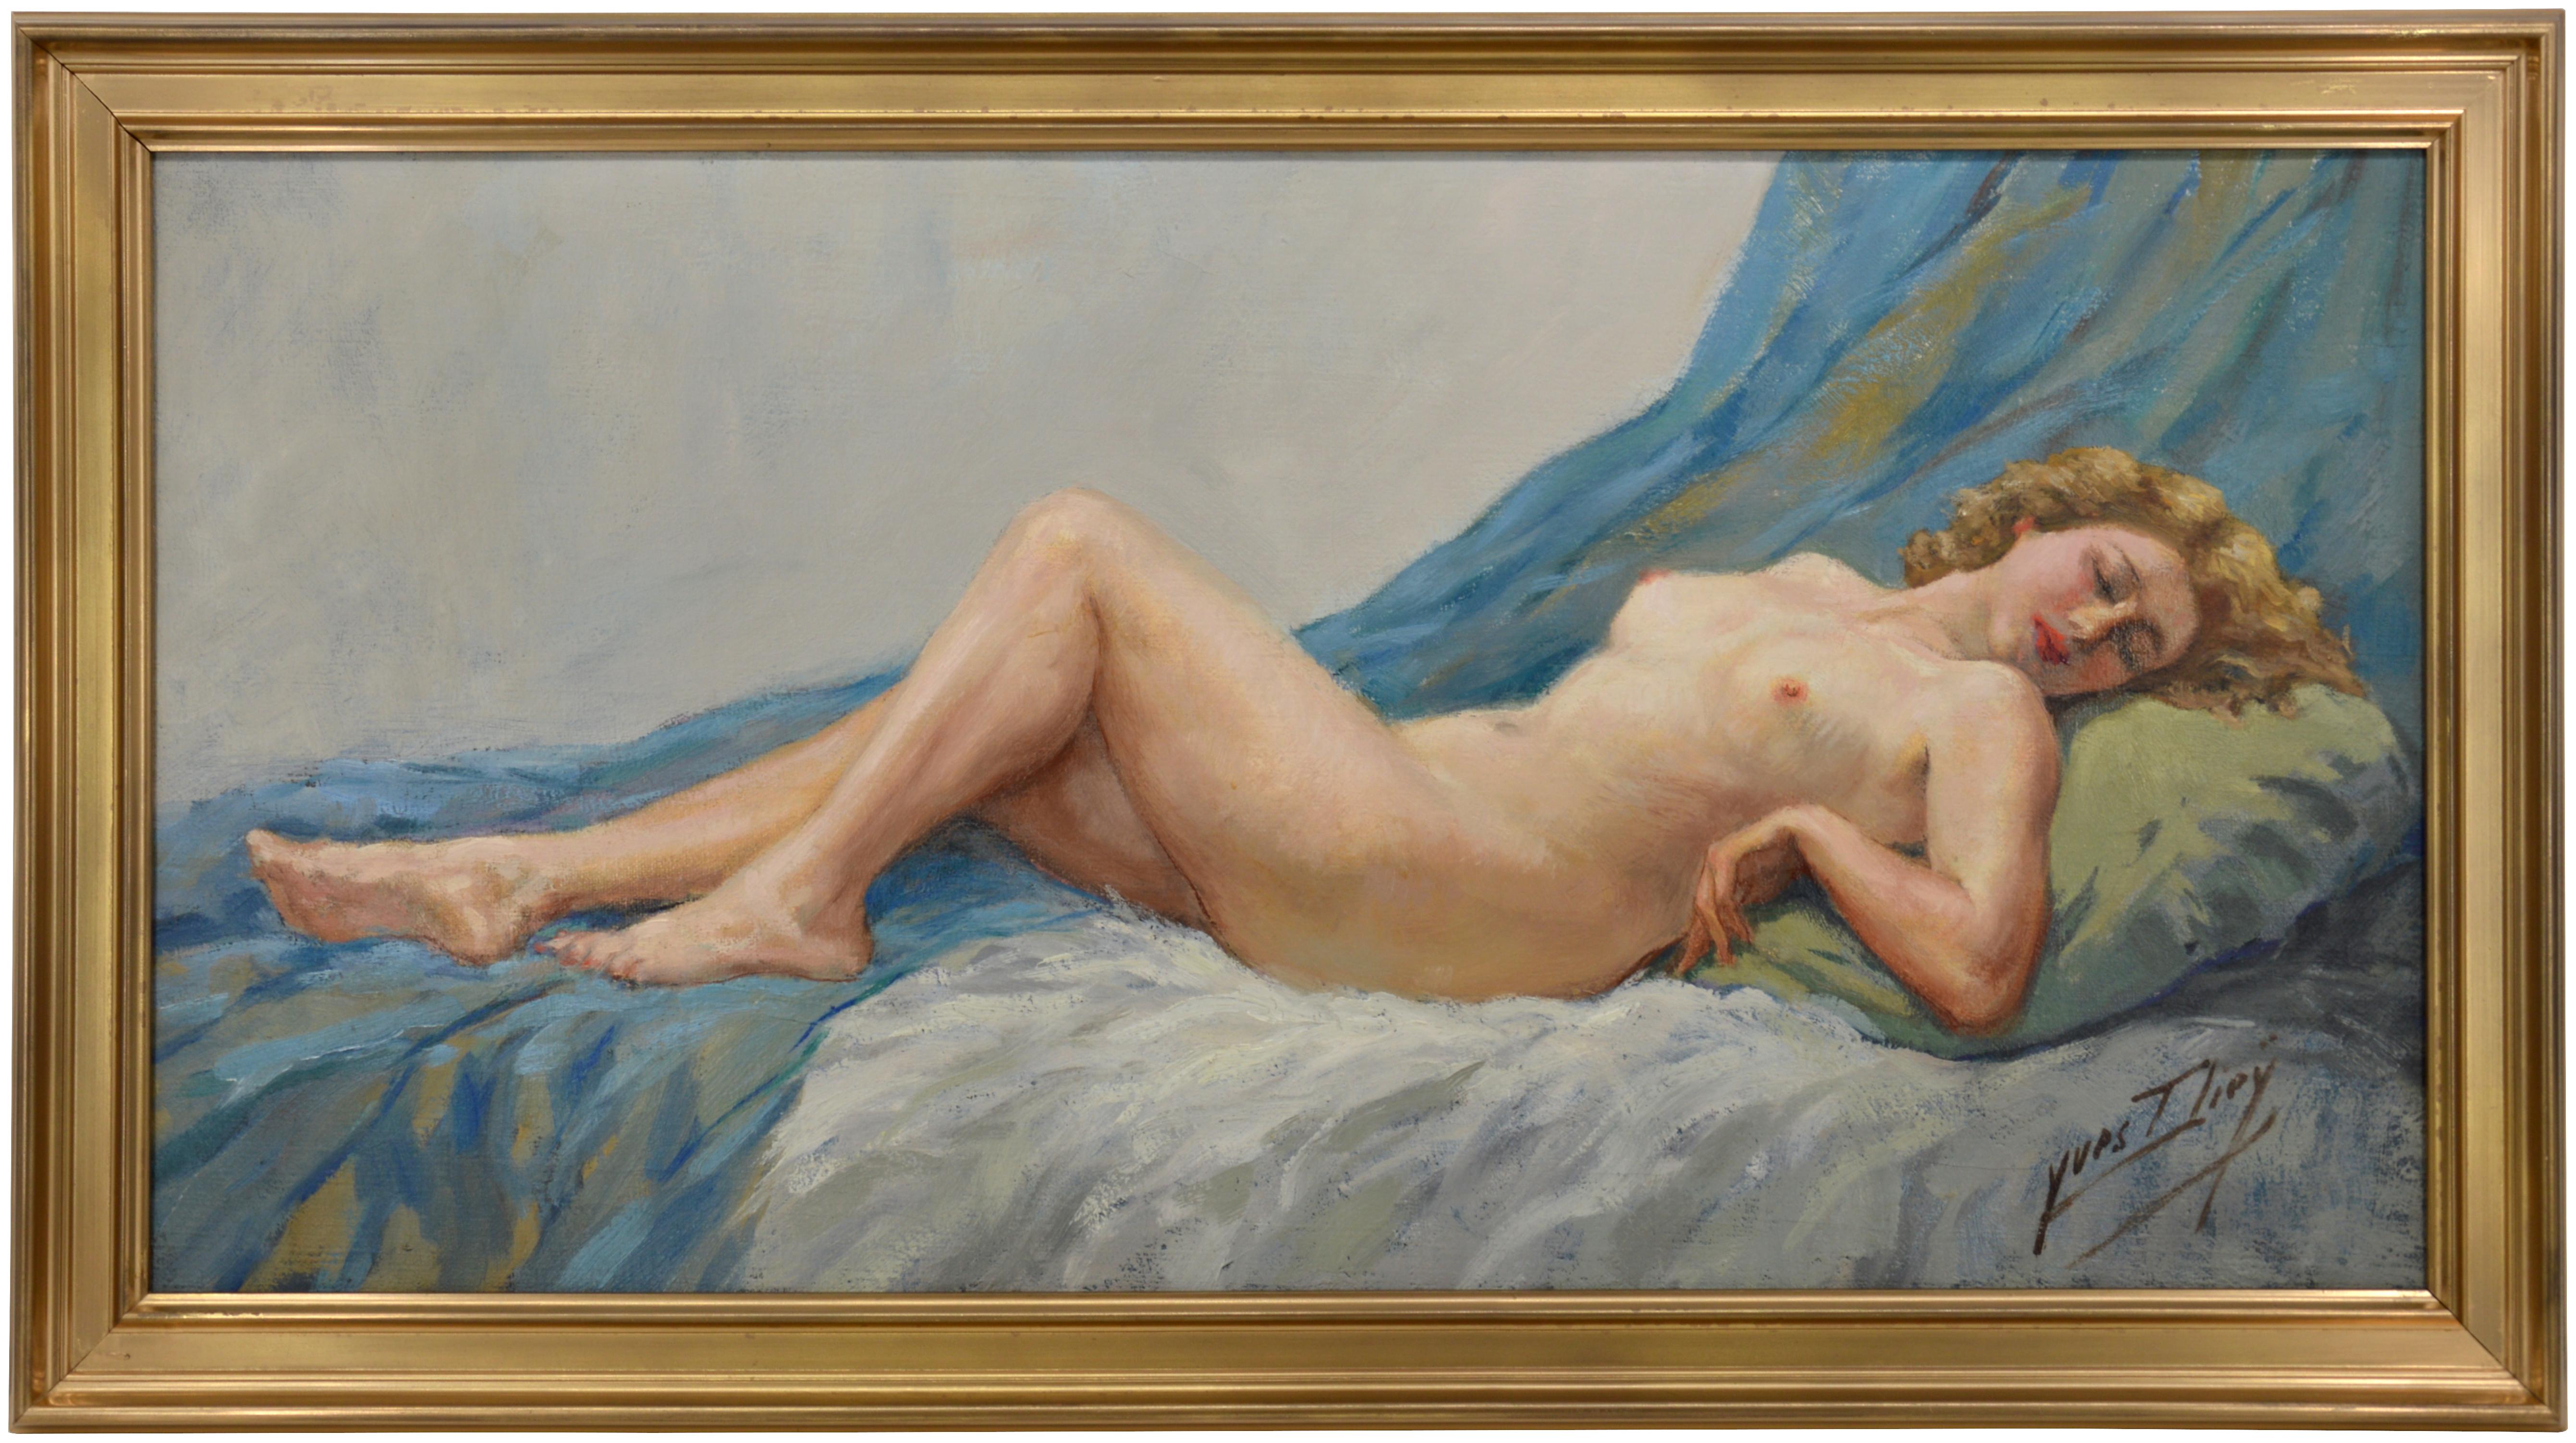 Yves Diey Nude Painting - YVES DIEY The Nude, Oil on canvas, 1930s